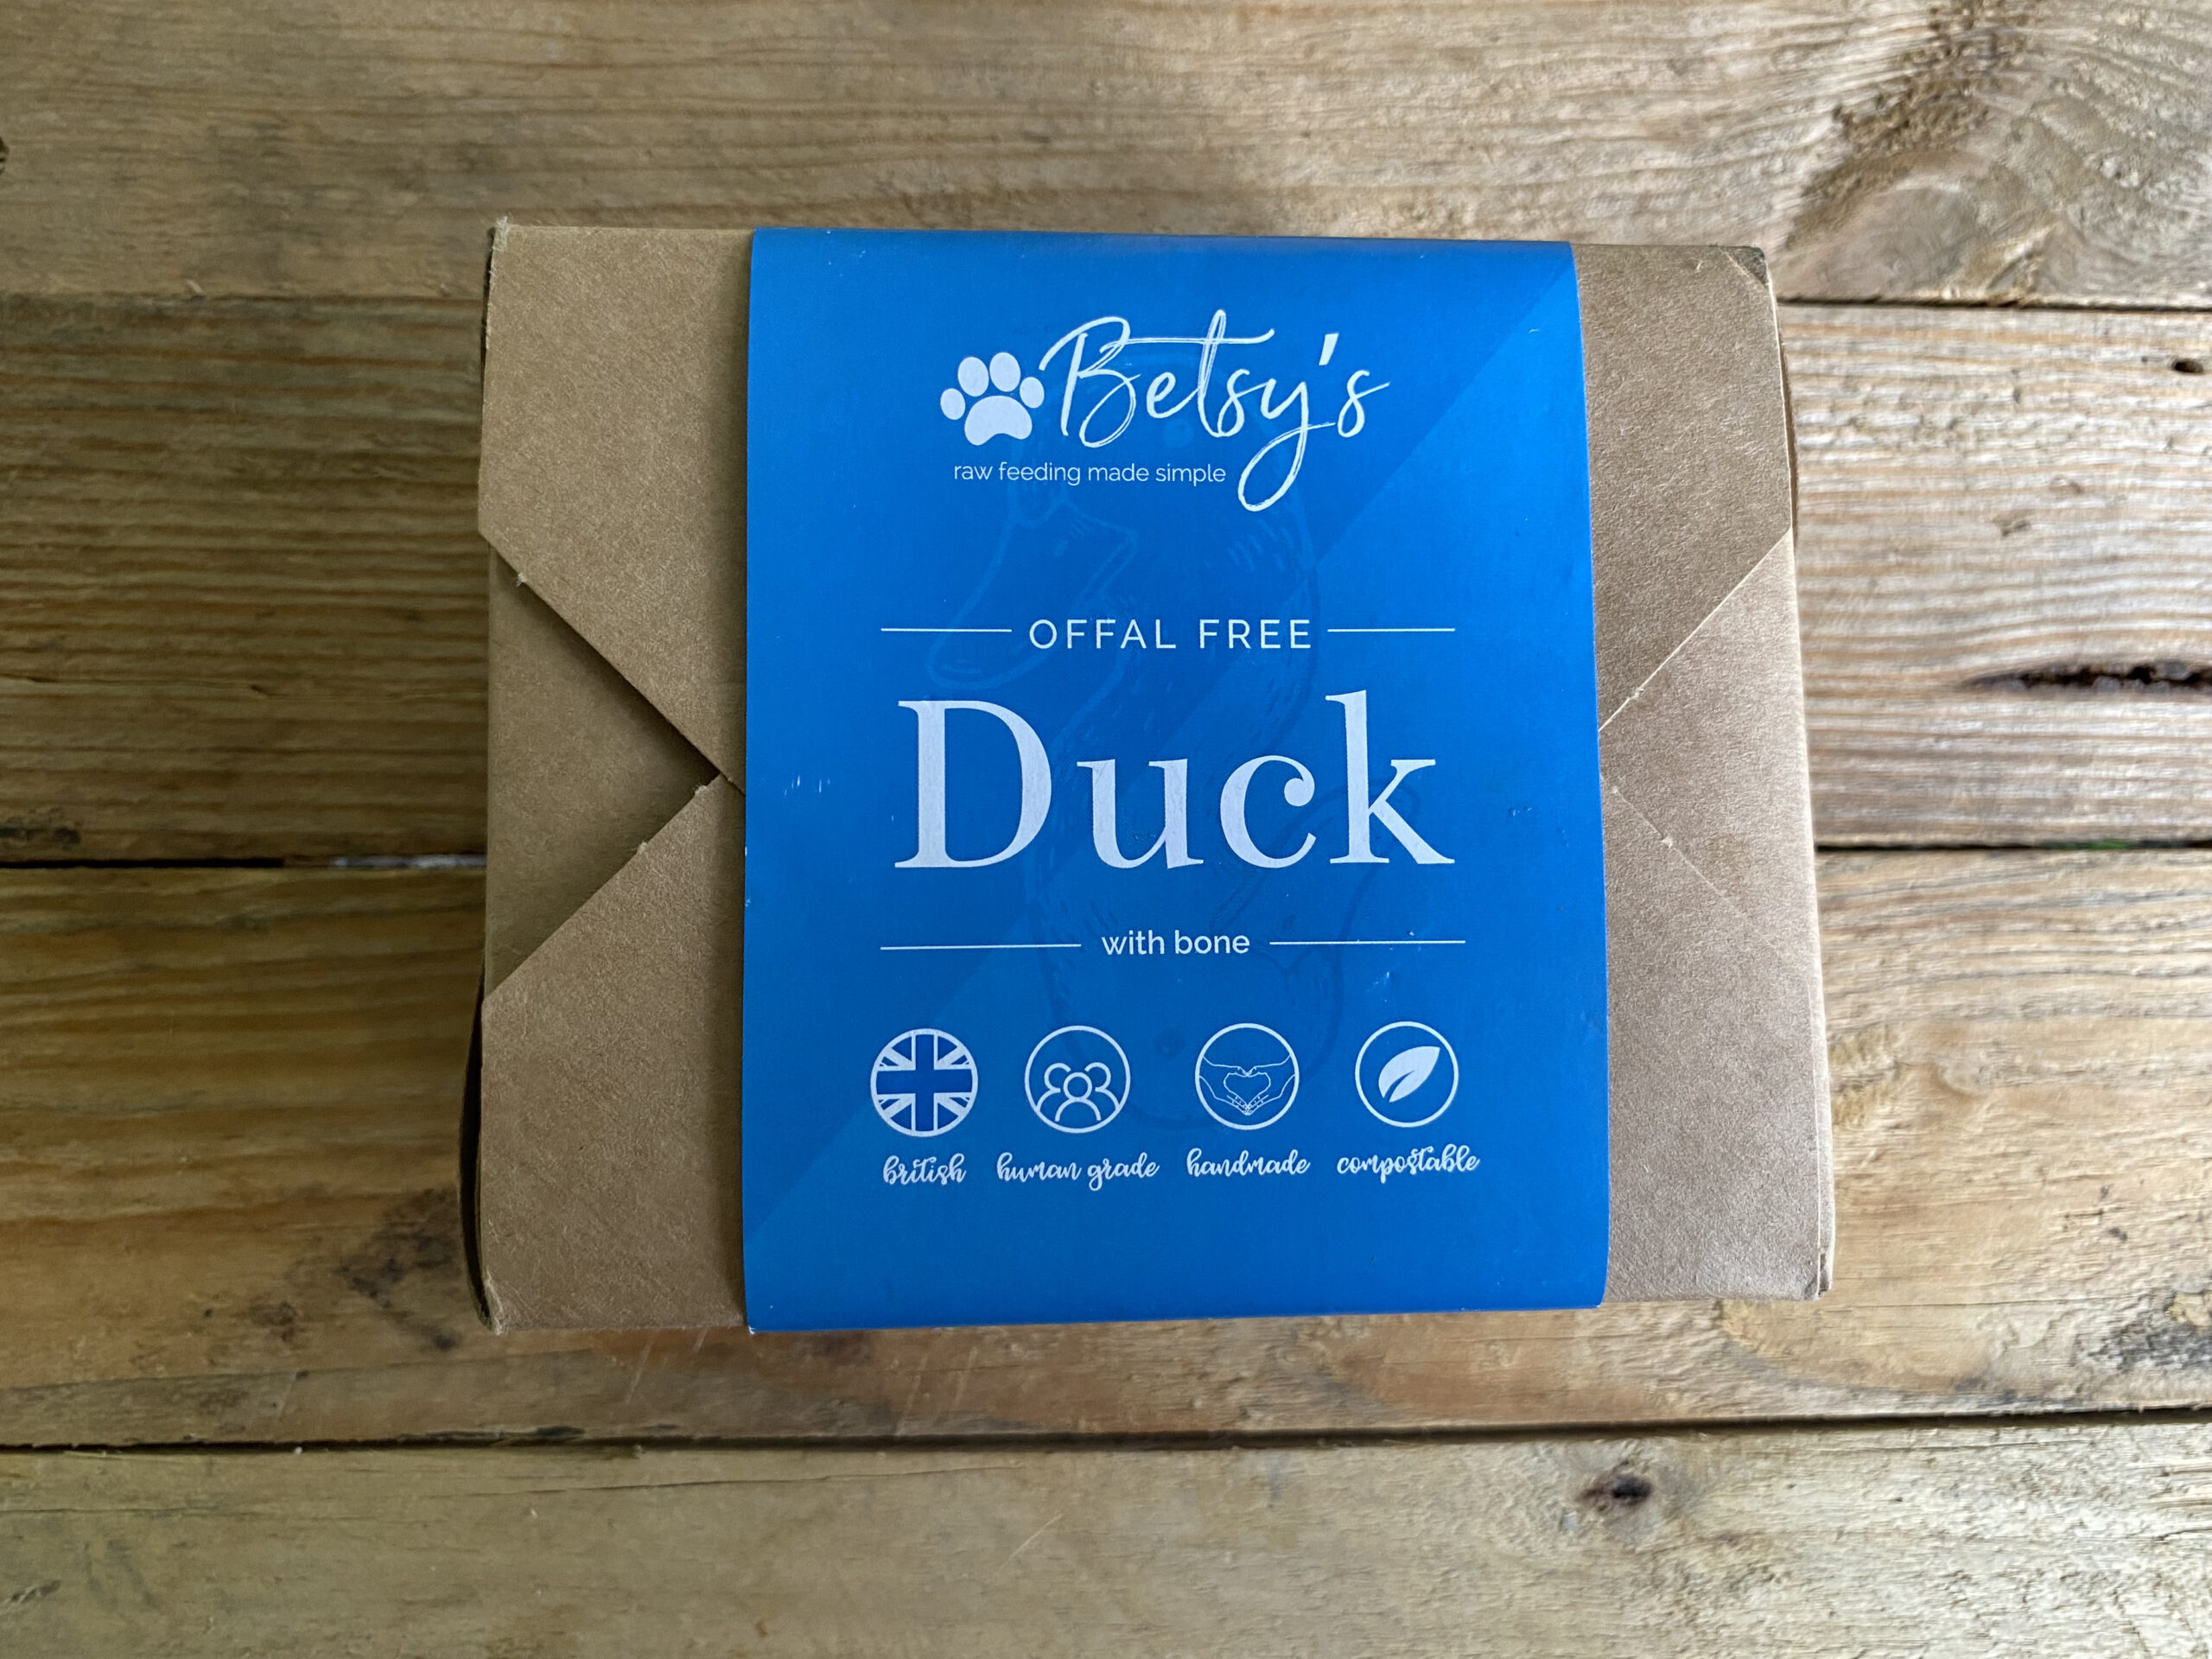 Betsy’s Offal Free Duck – 500g